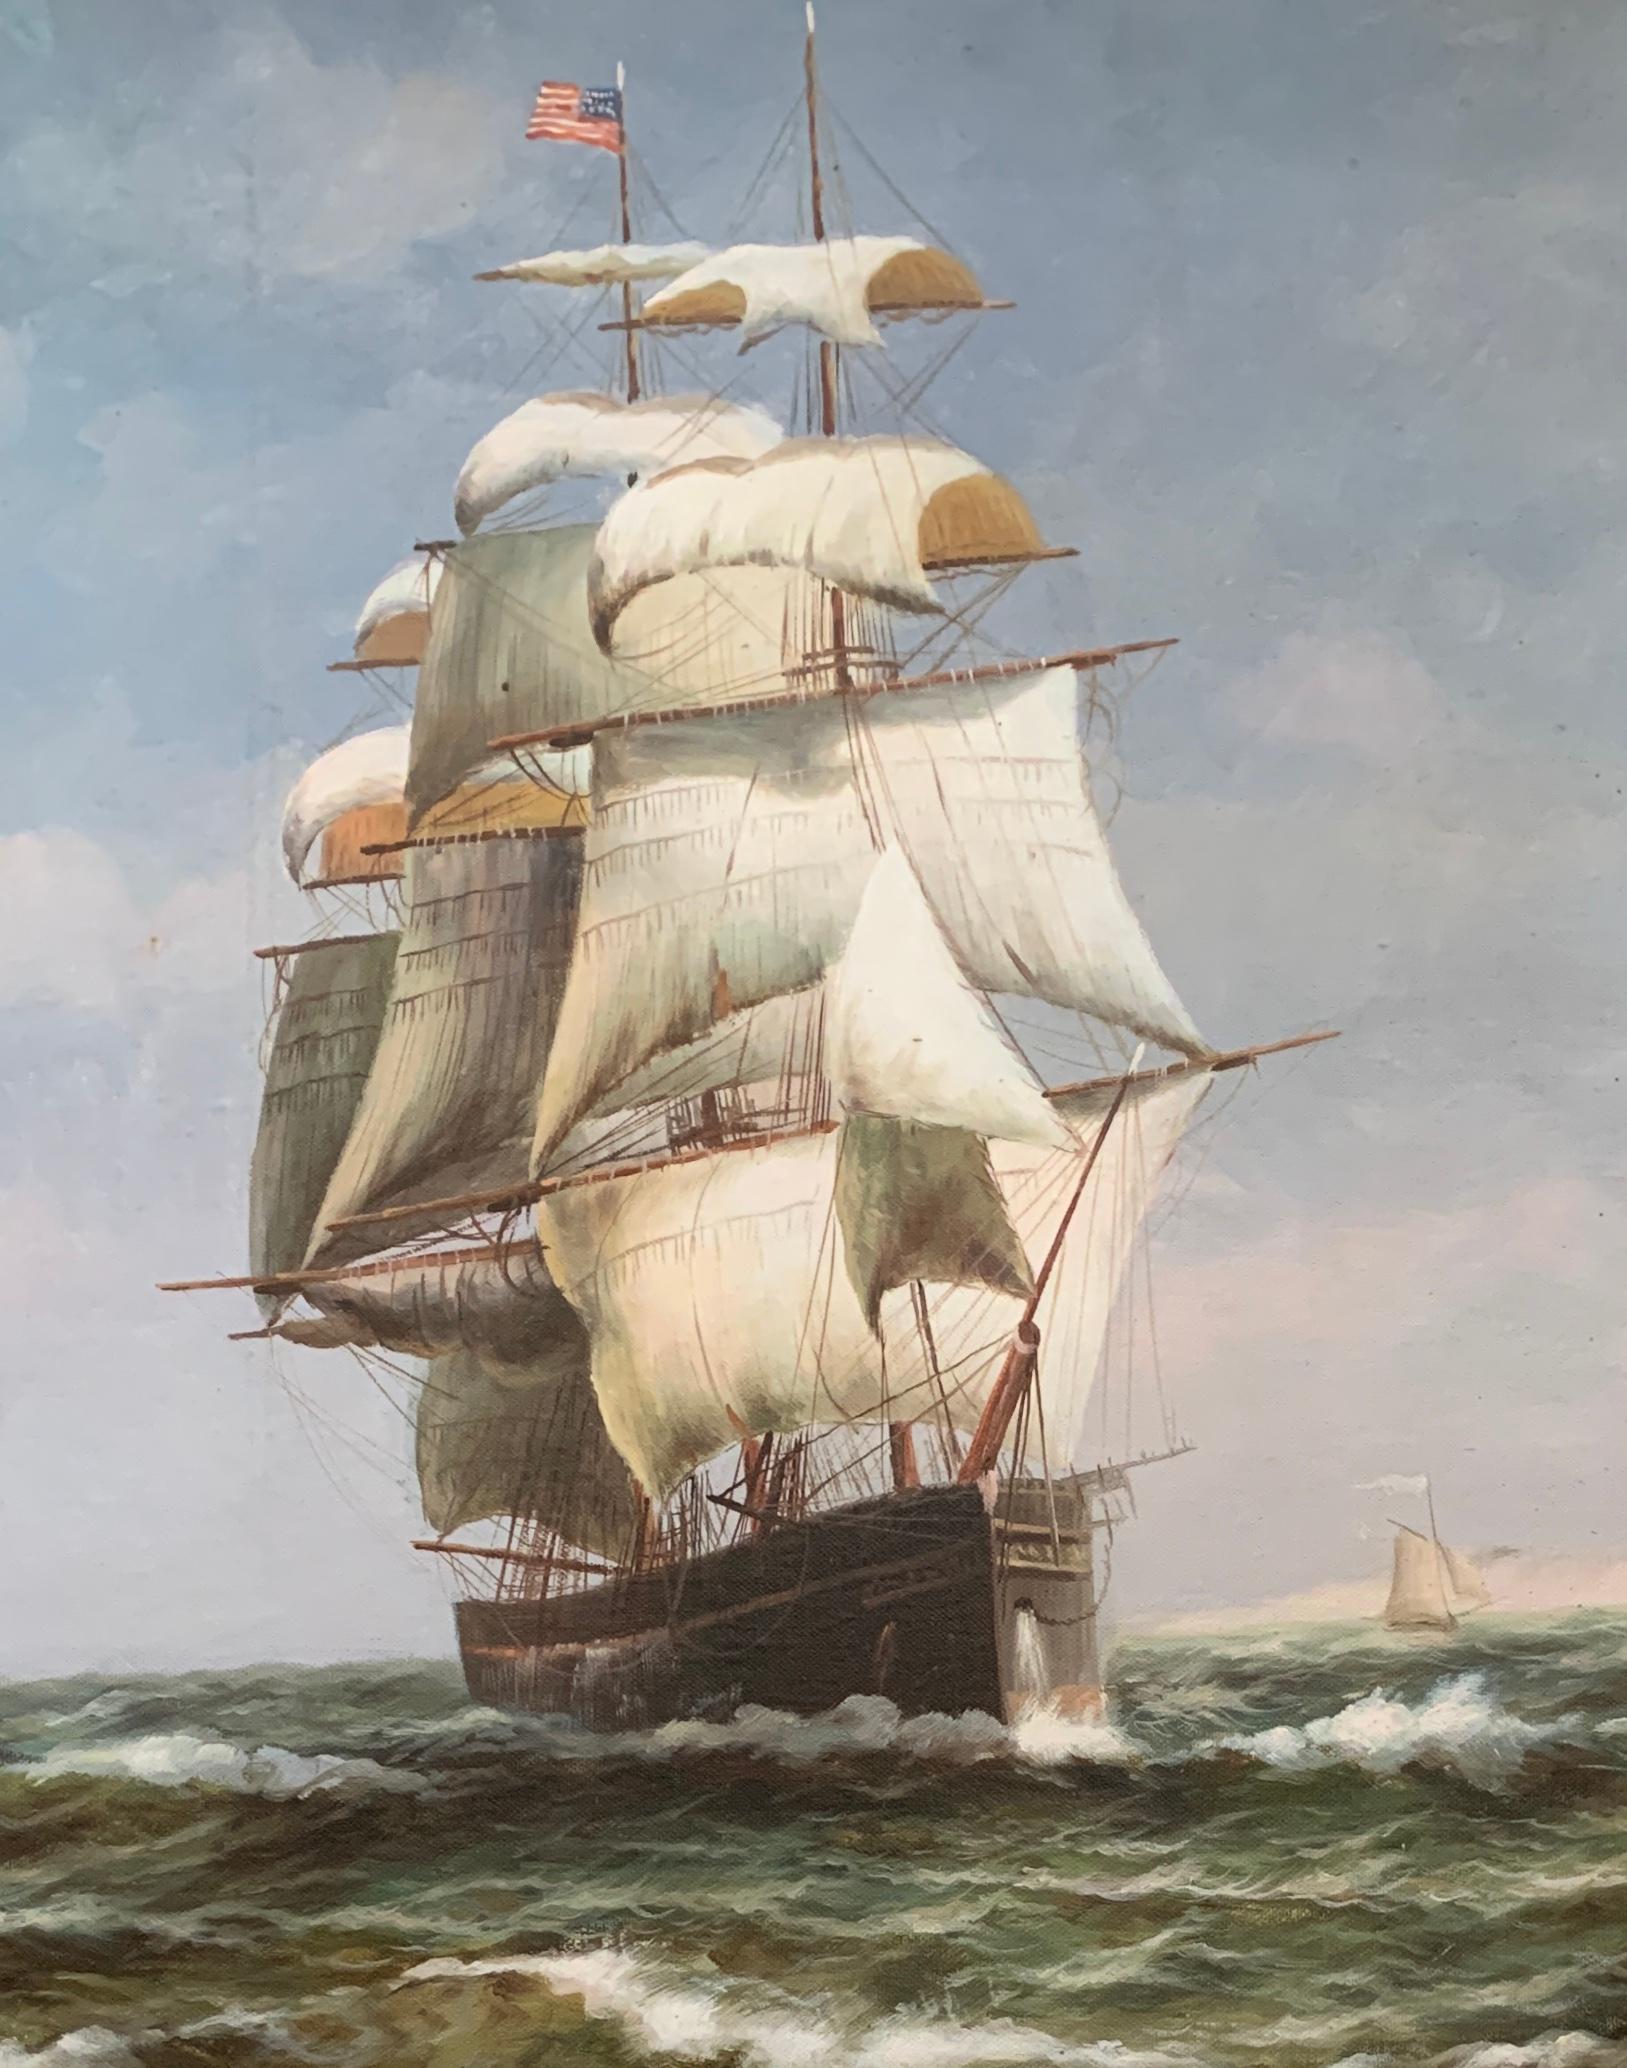 19th century style American tea clipper-sailboat at sea with a landscape beyond. - Realist Painting by P.J.Levin